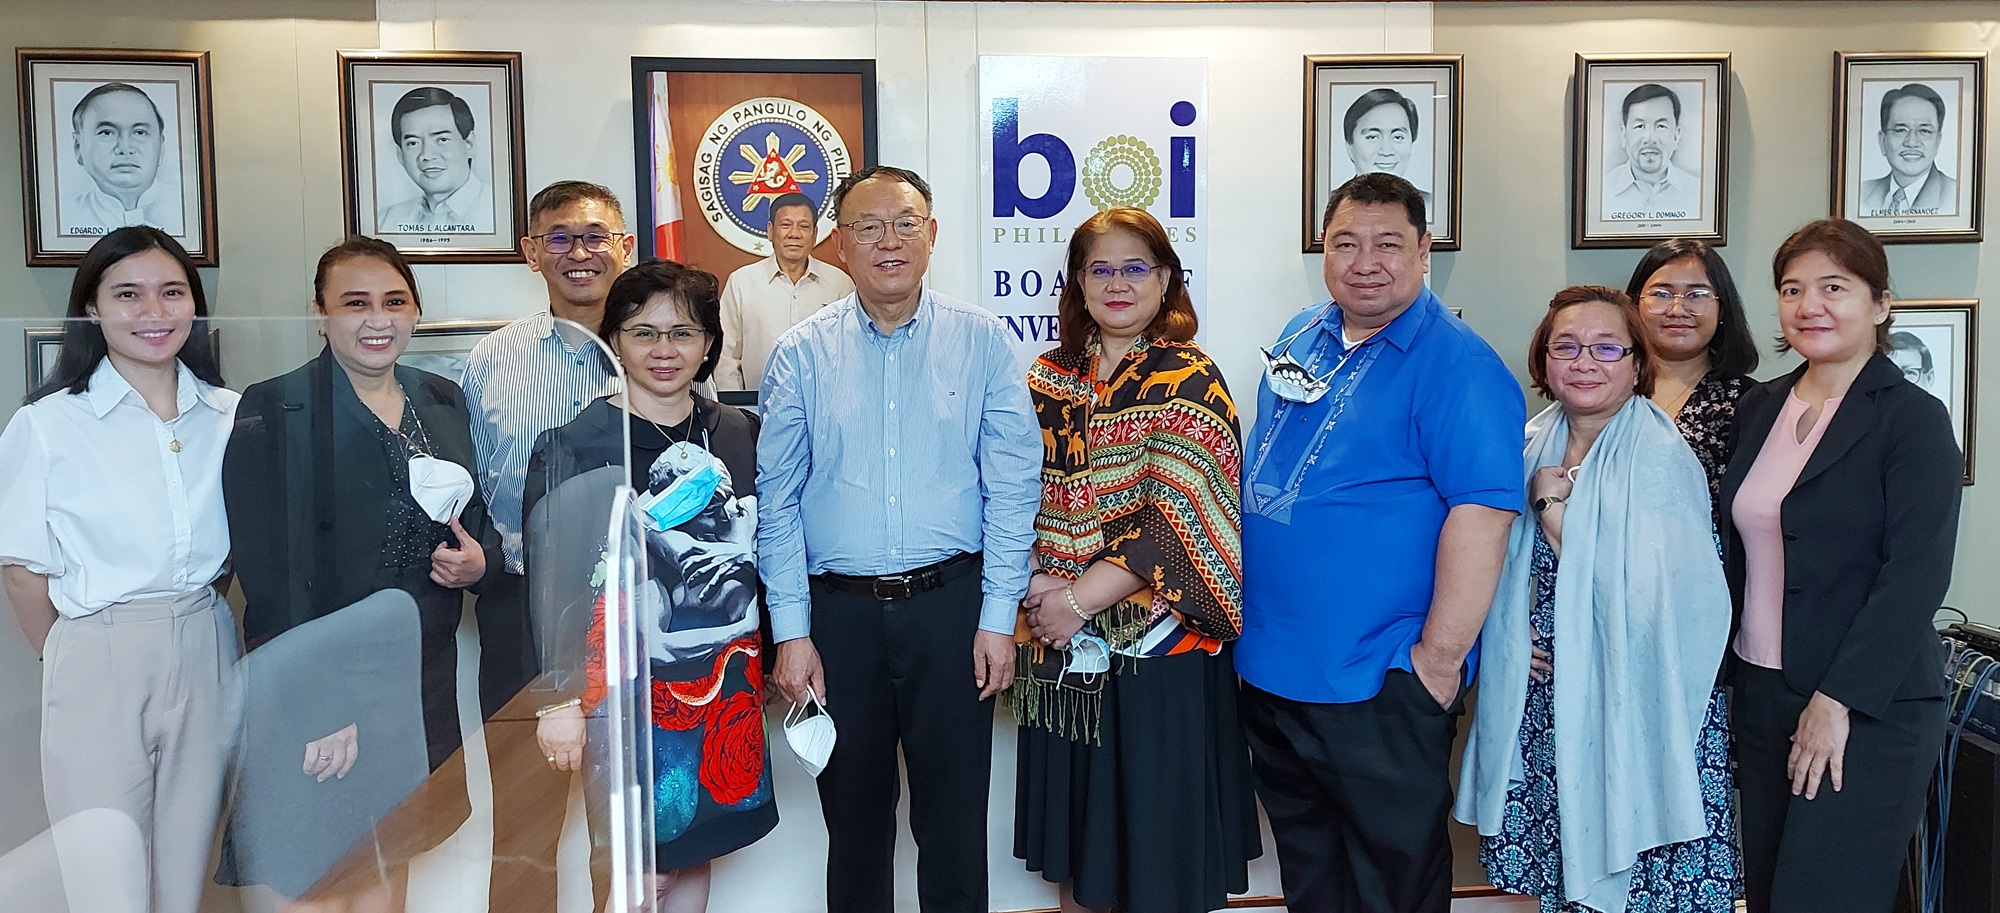 Global biopharma company in China meets BOI on investment plans, vaccine clinical trial projects in PH